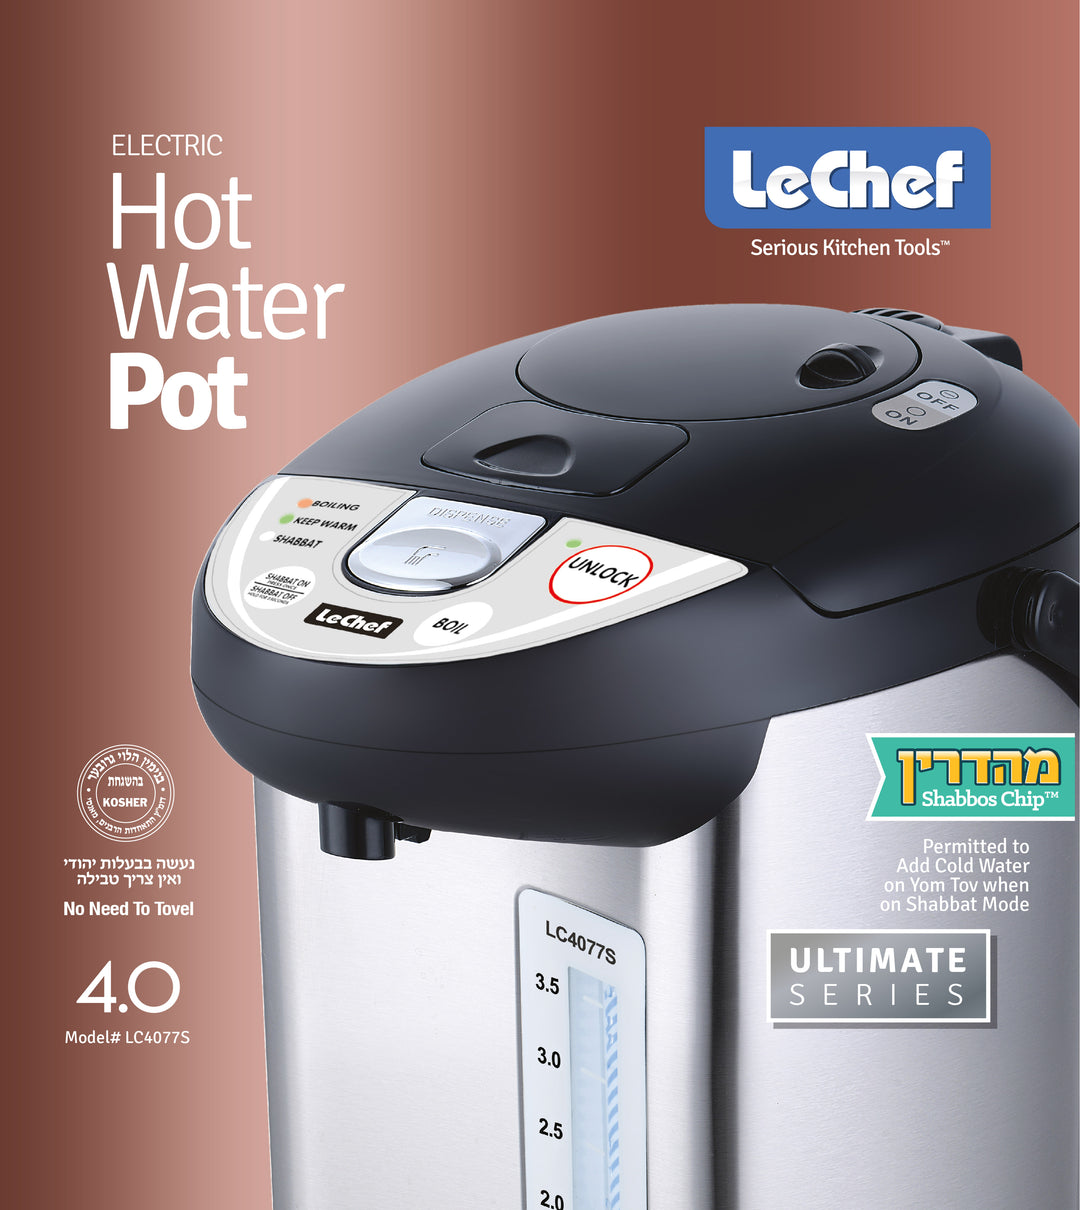  Magic Mill Pro Electric Kettle with tea Infuser and